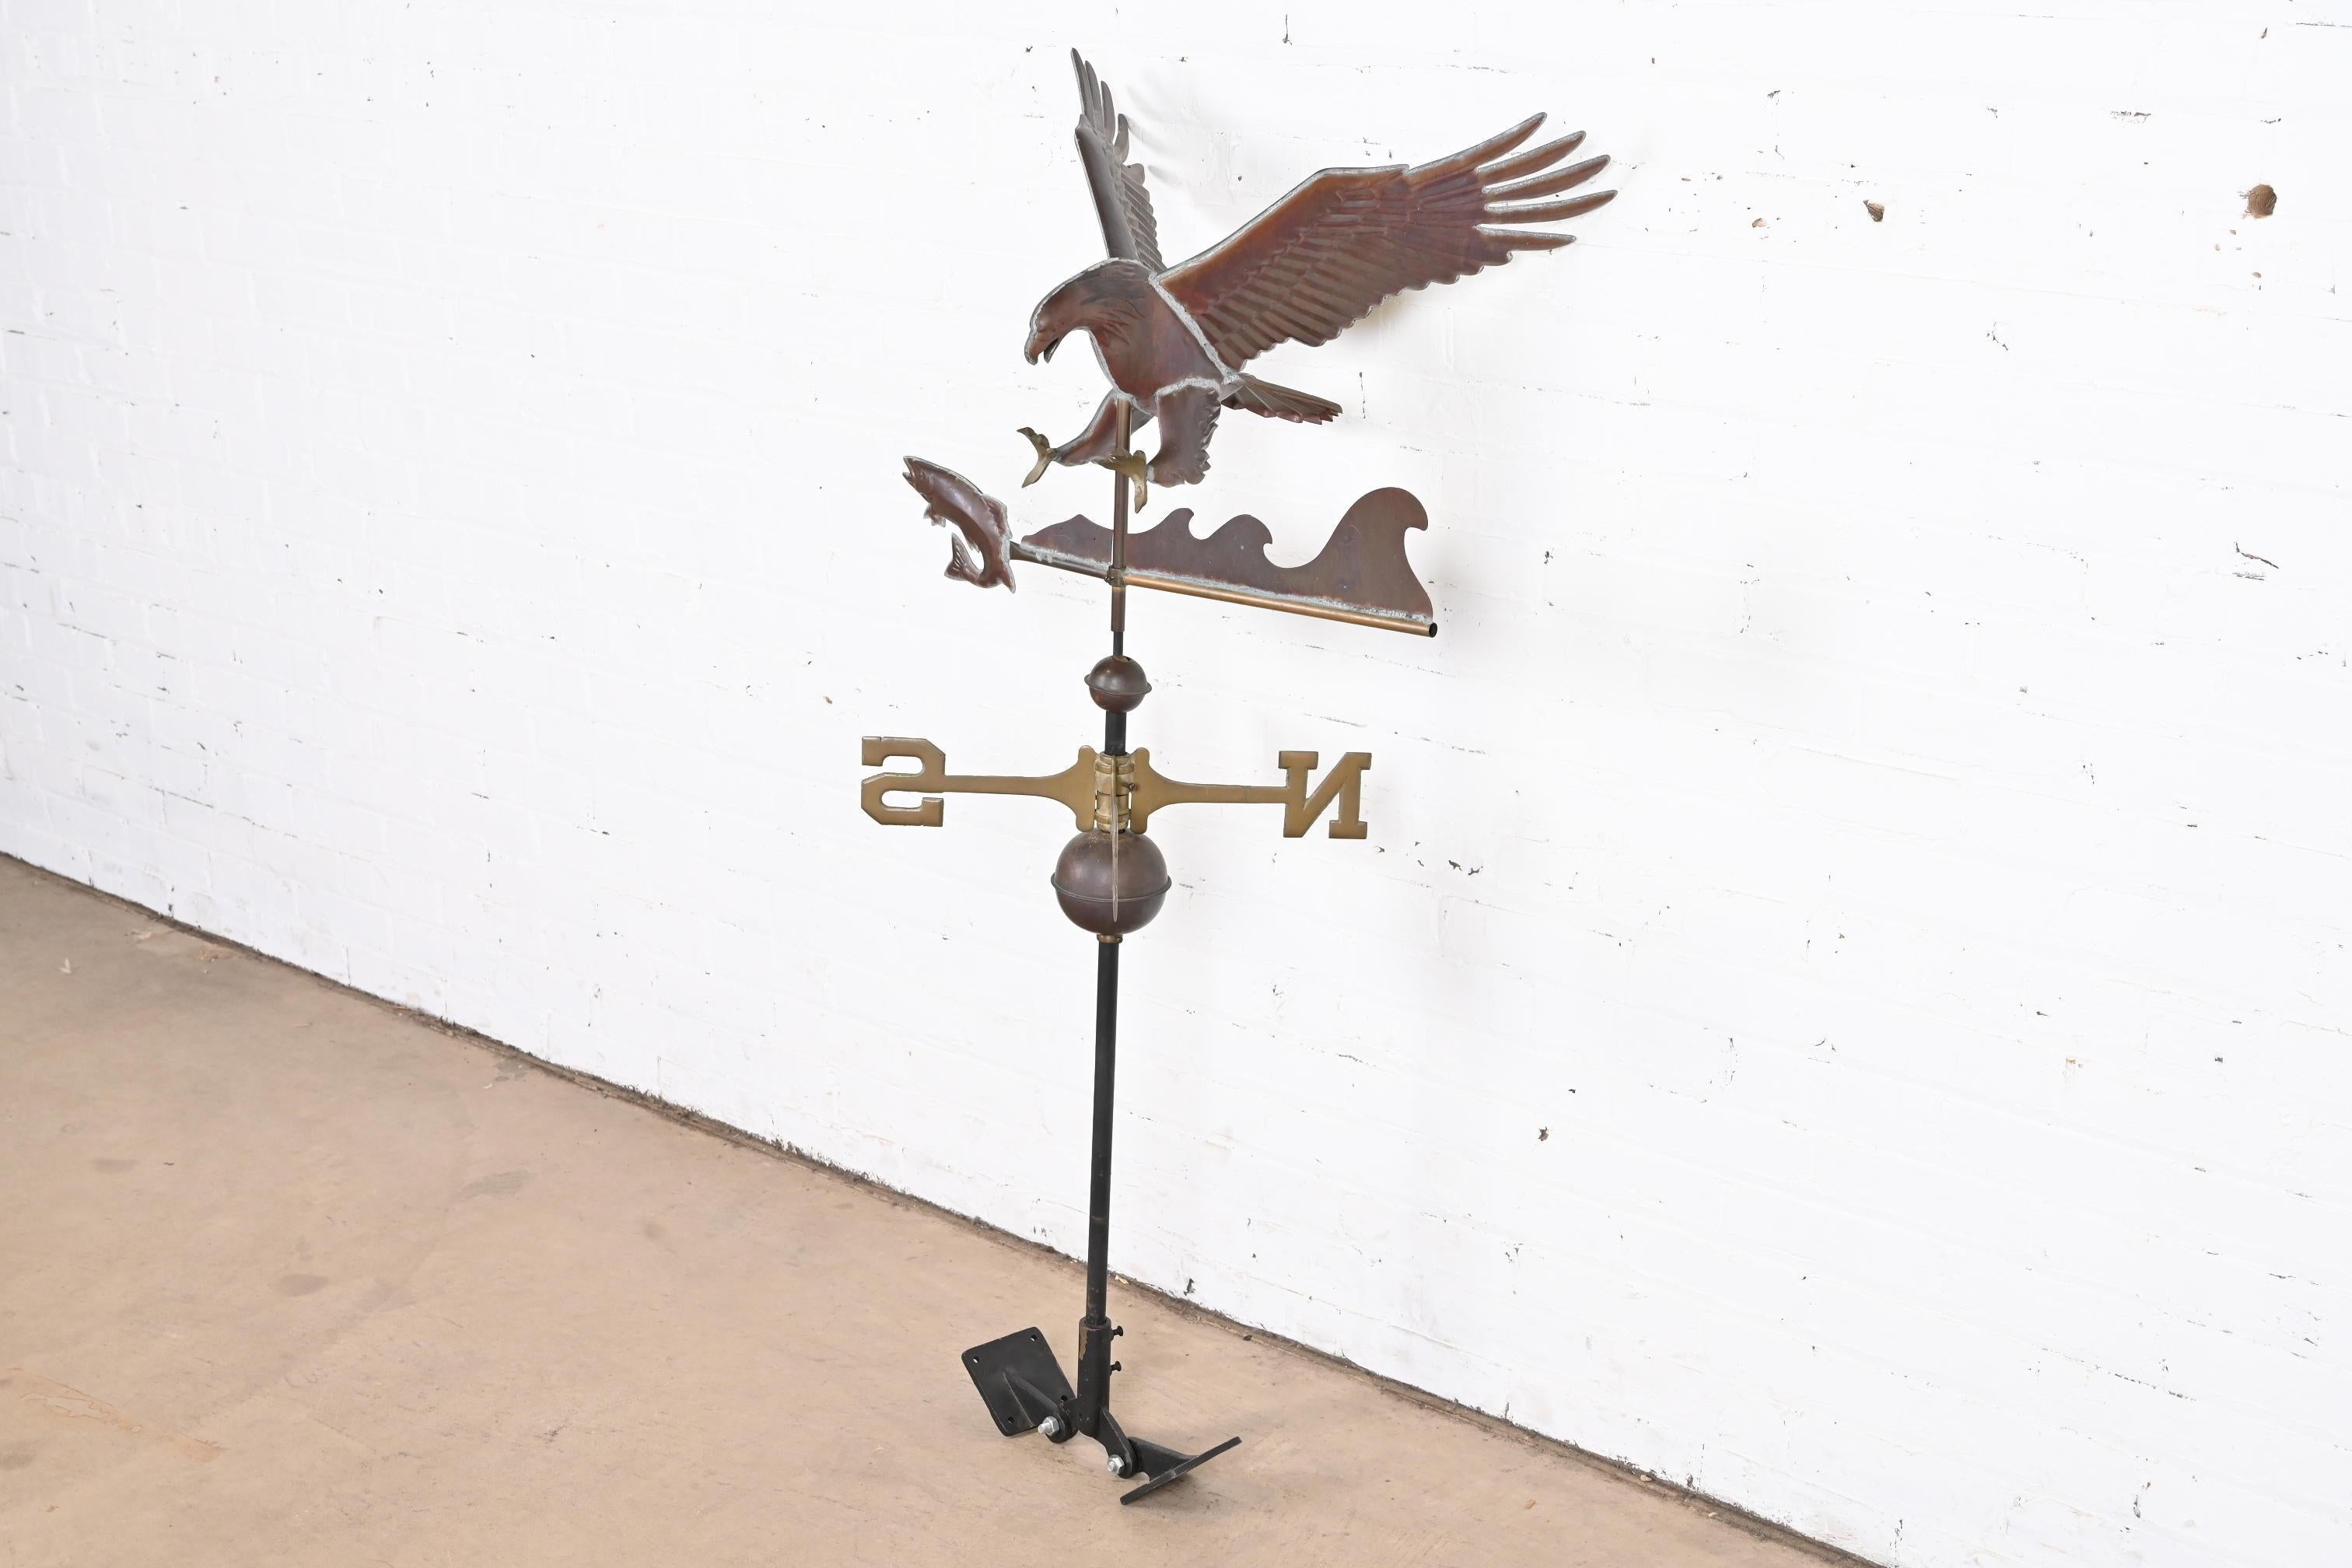 A gorgeous copper weather vane with an eagle hunting a fish

USA, 20th century

Cast copper and brass, on wrought iron stand.

Measures: 24